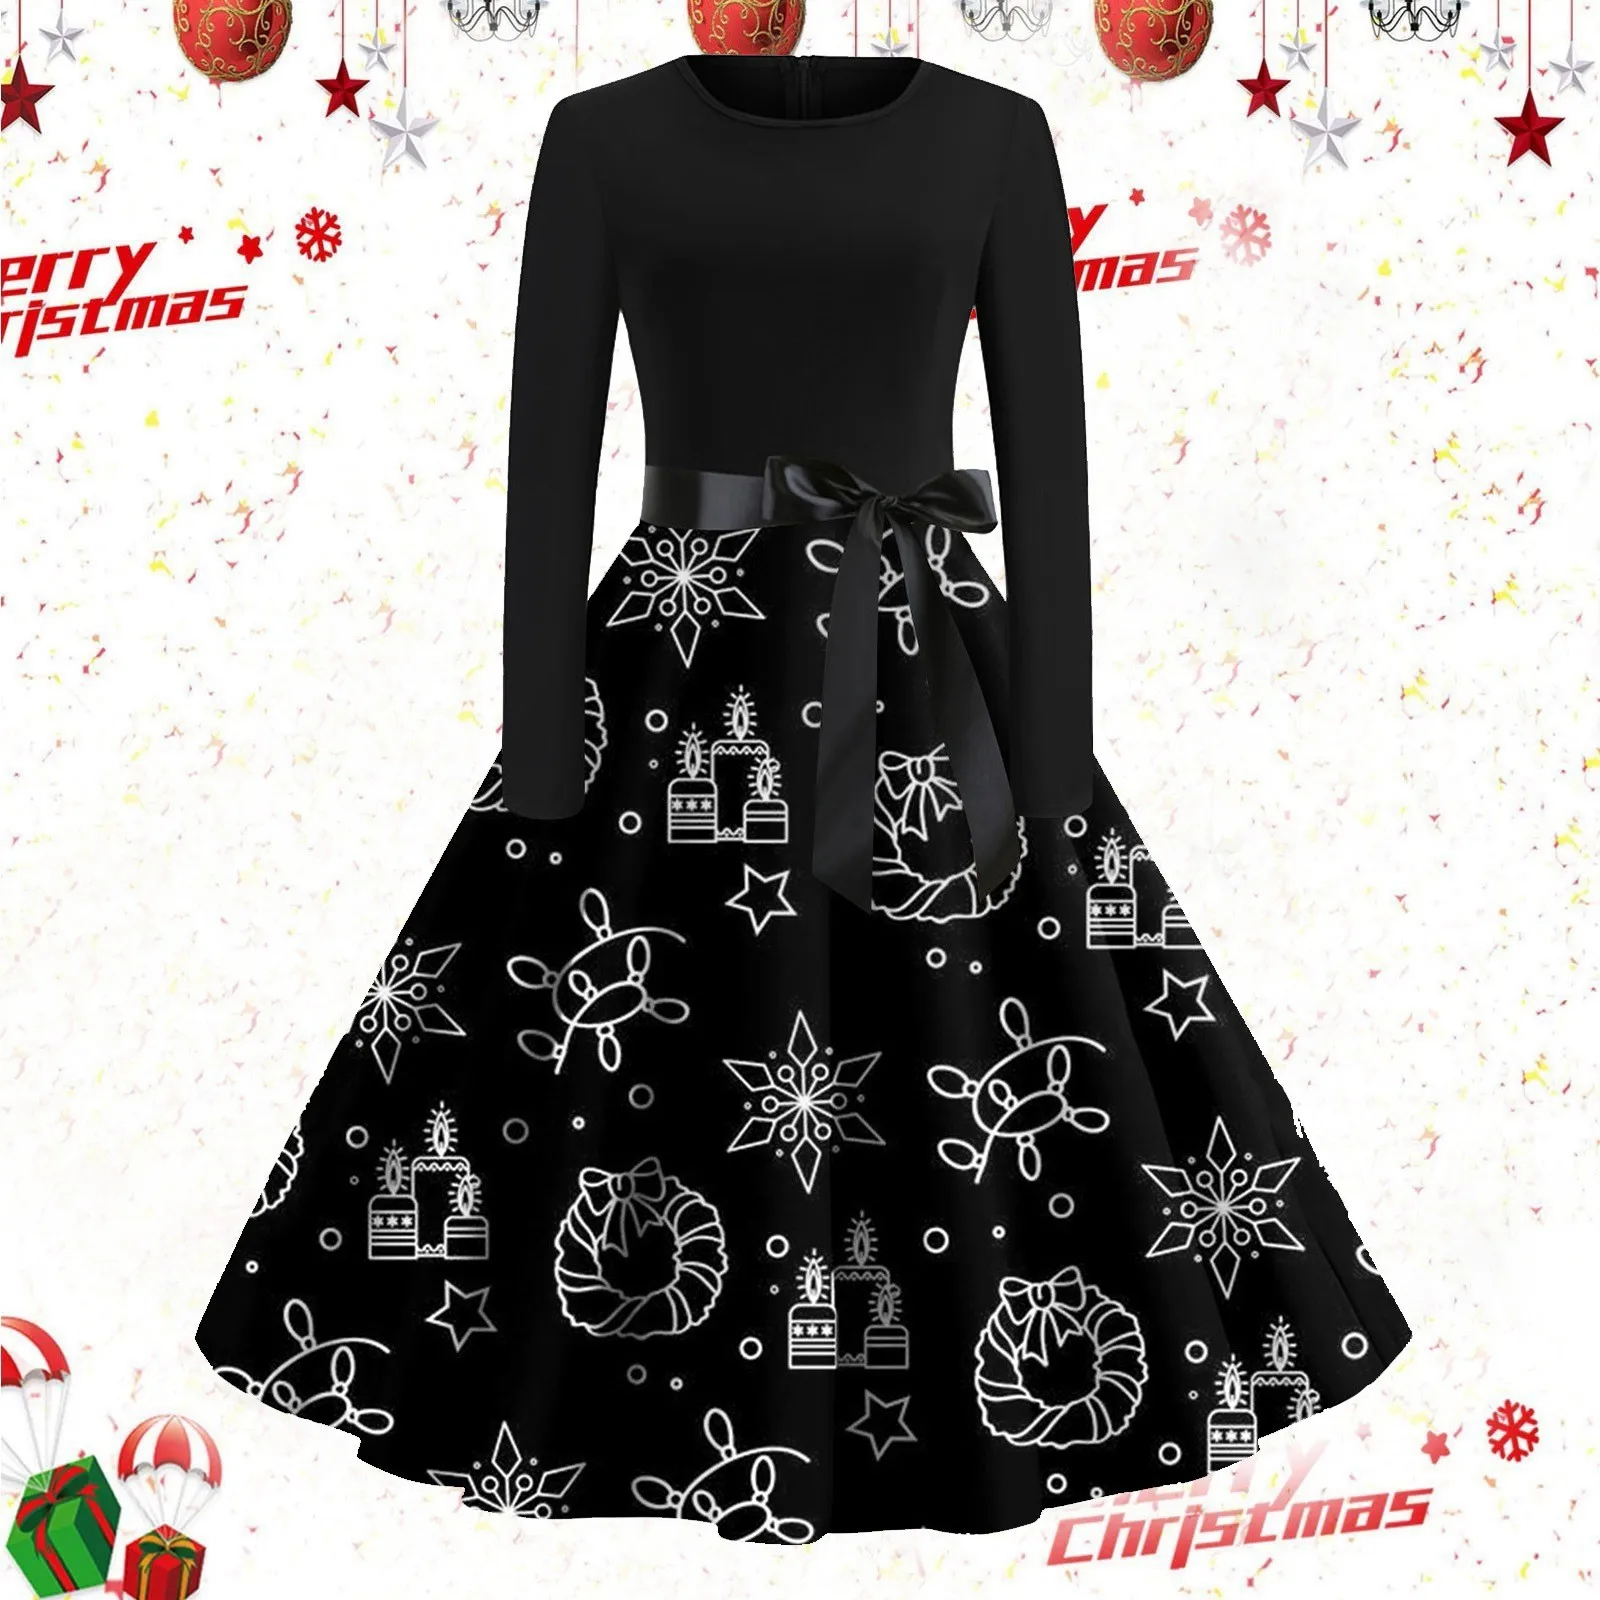 

Merry Christmas Dresses For Women's 2023 Elk Snowflake Printed Long Sleeved Swing Dress With Bow Belt A Line Party Dress